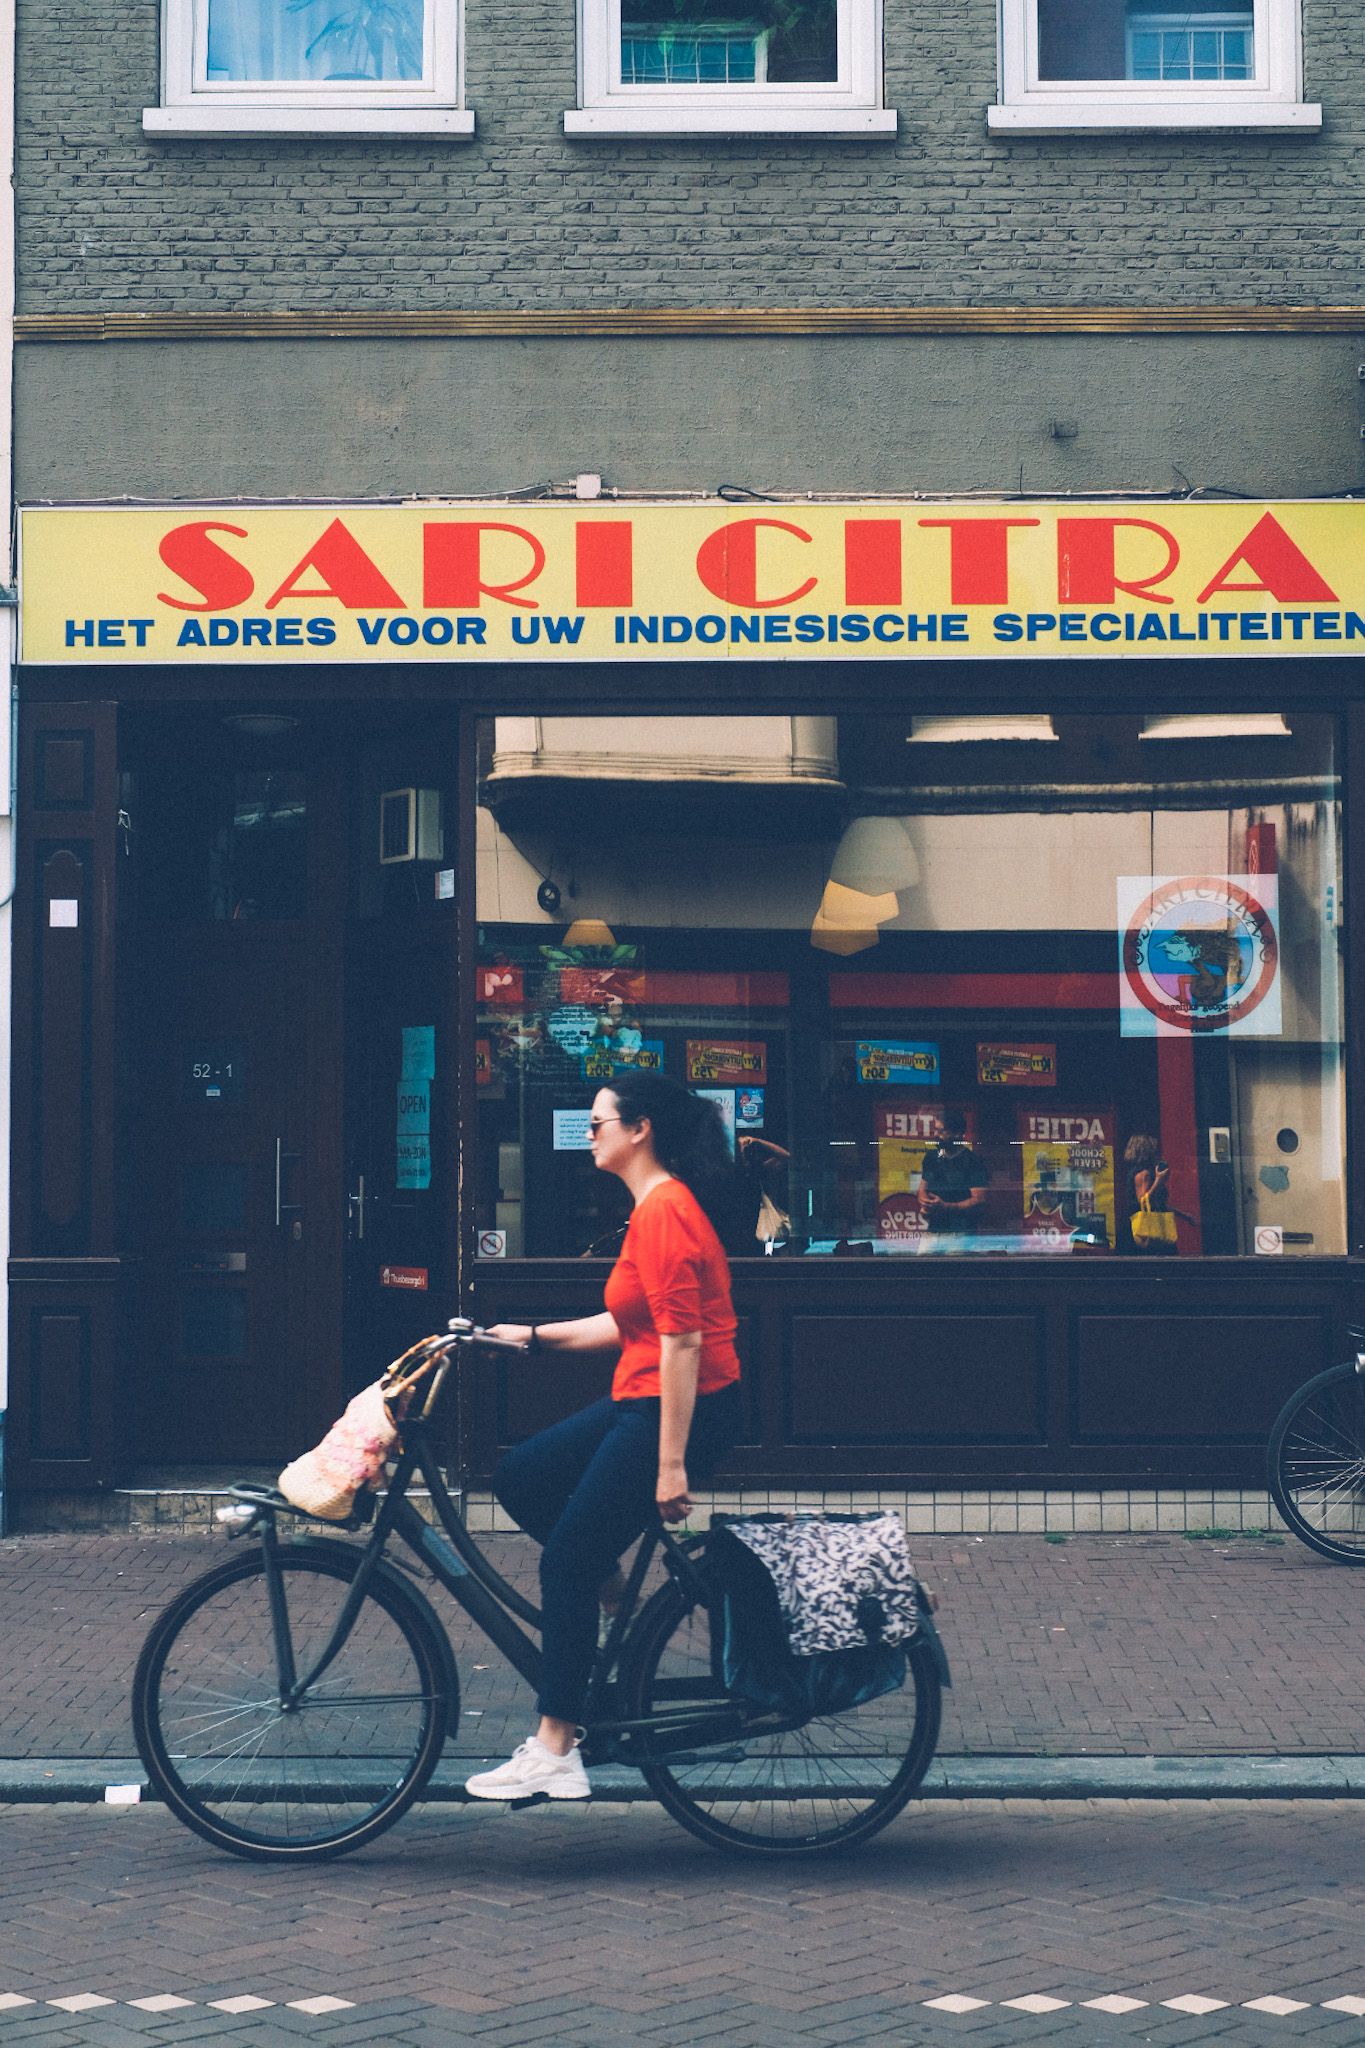 A woman in a red shirt on a bike passes in front of a building, a sign with bright red letters to match her shirt saying “Sari Sitra.”